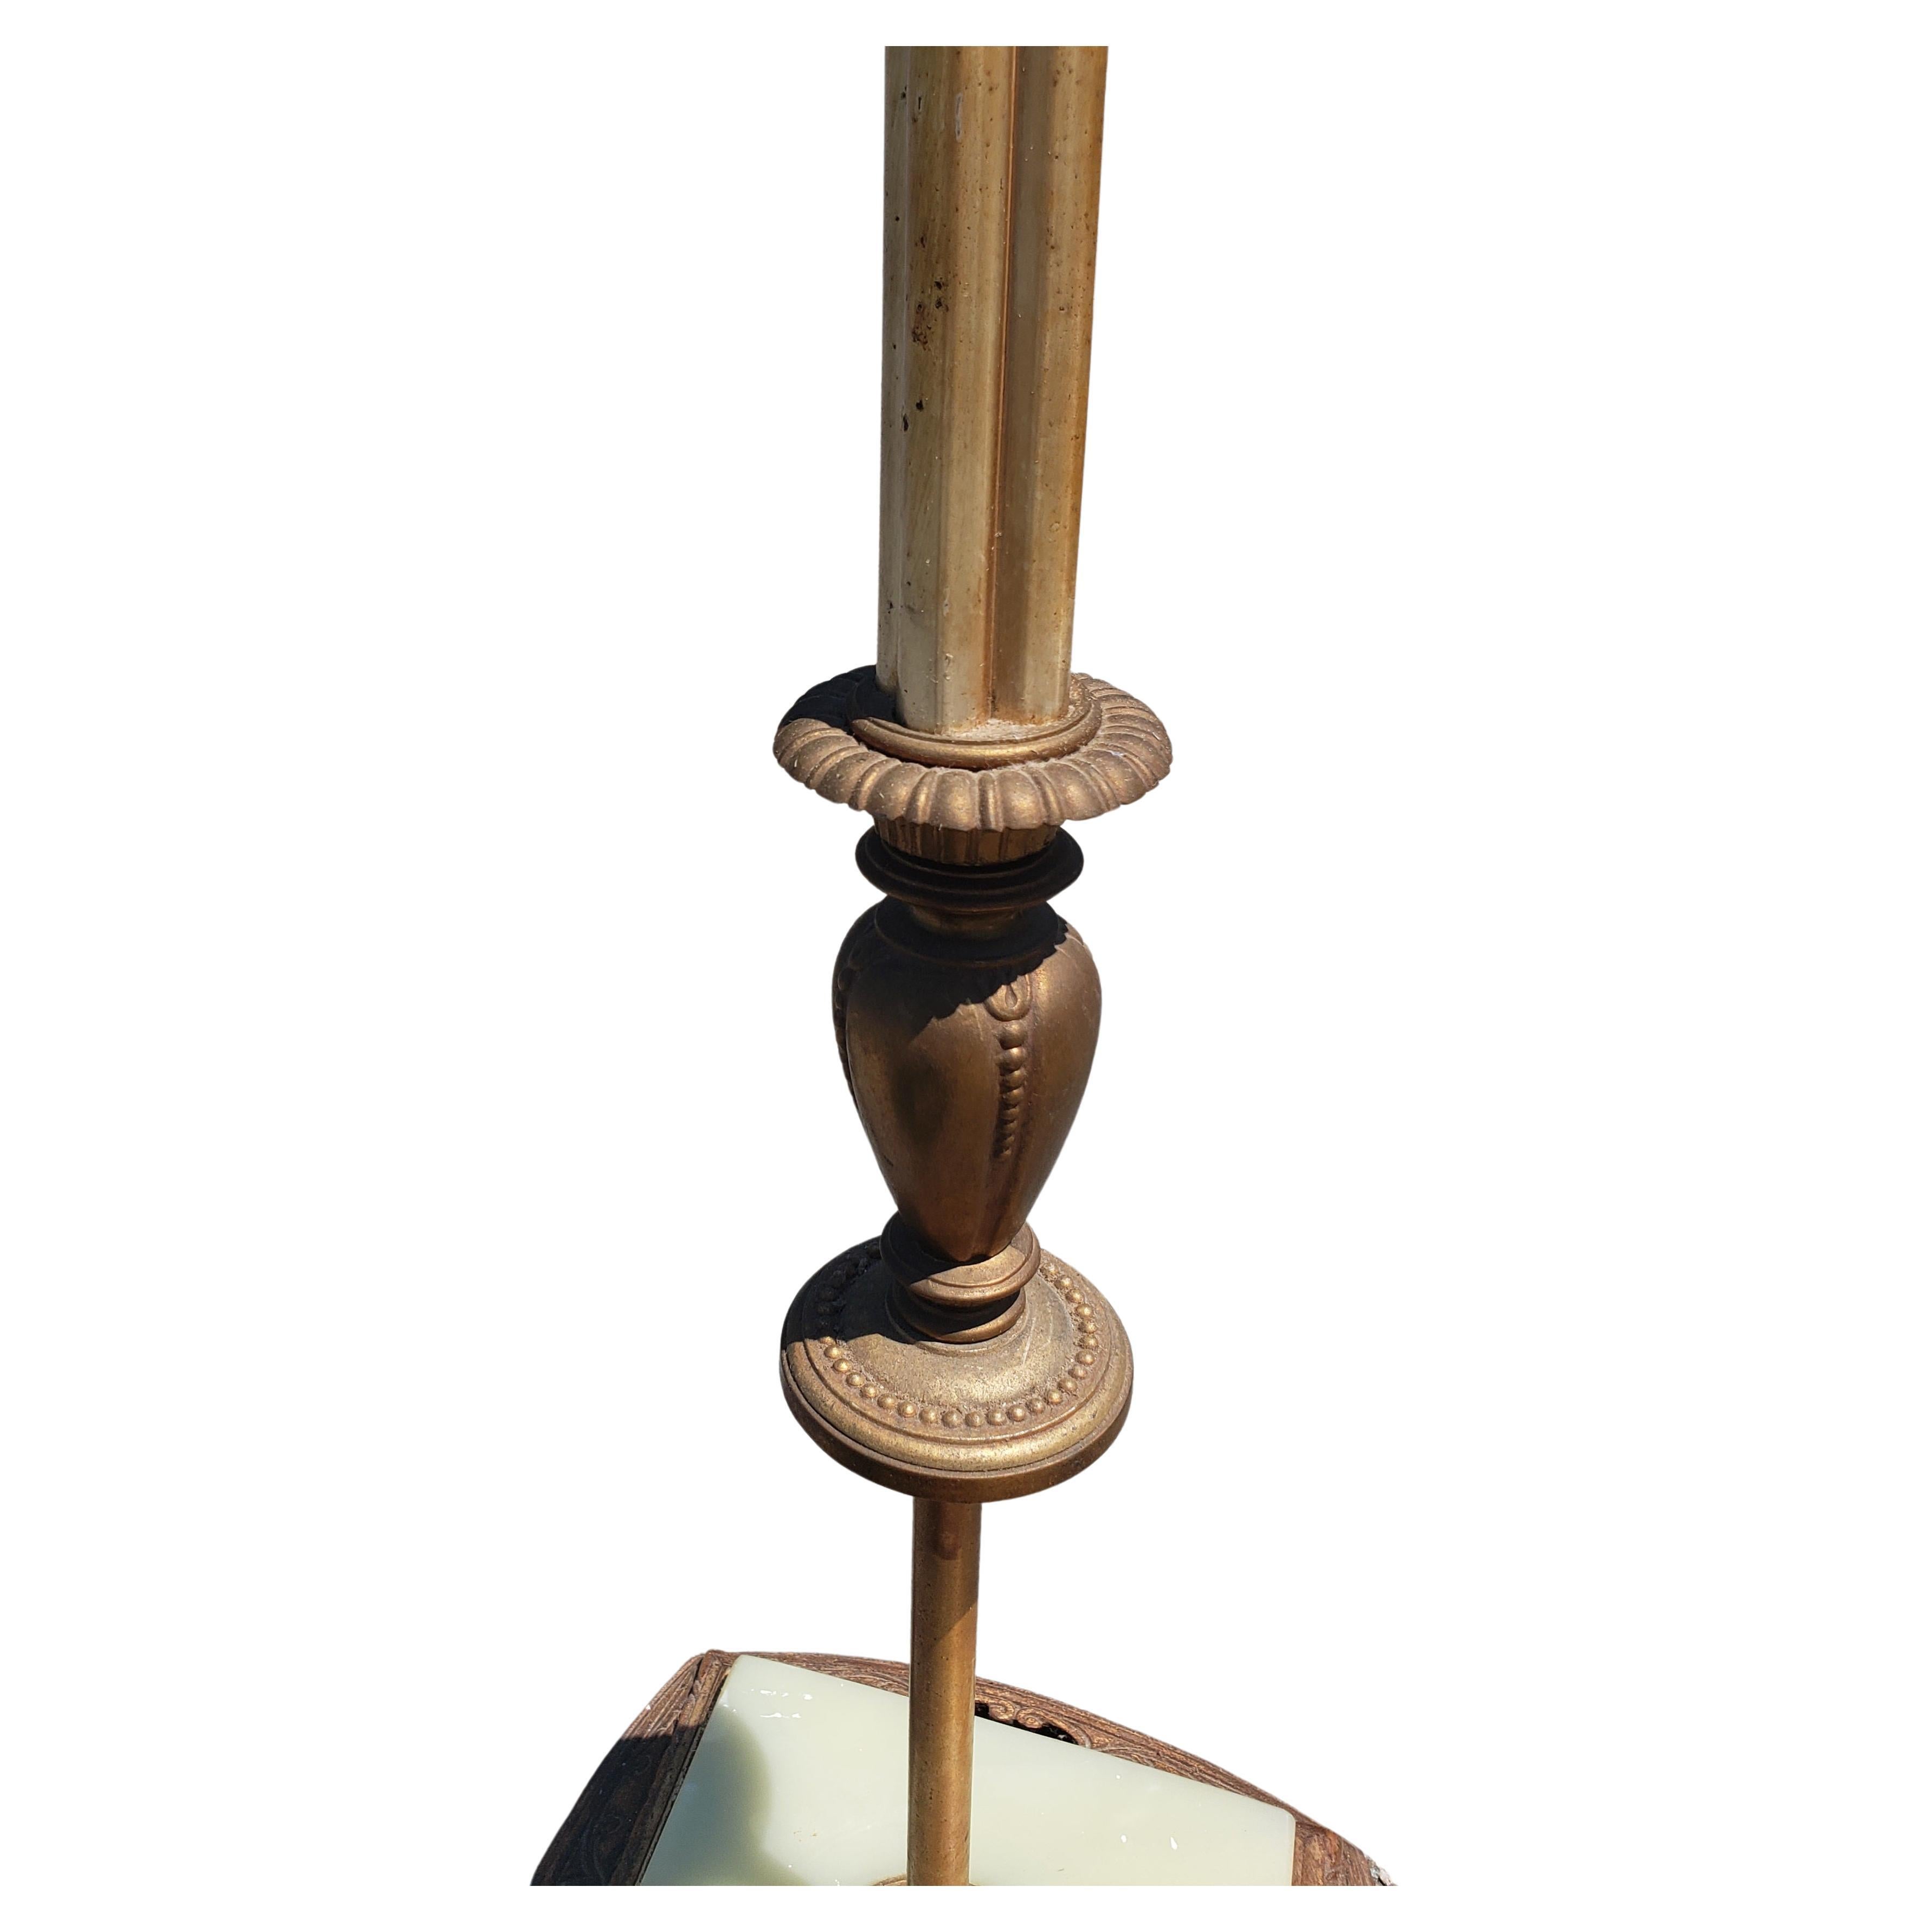 20th Century Late Victorian Patinated Metal and Onyx Torchiere 4-Light Floor Lamp For Sale